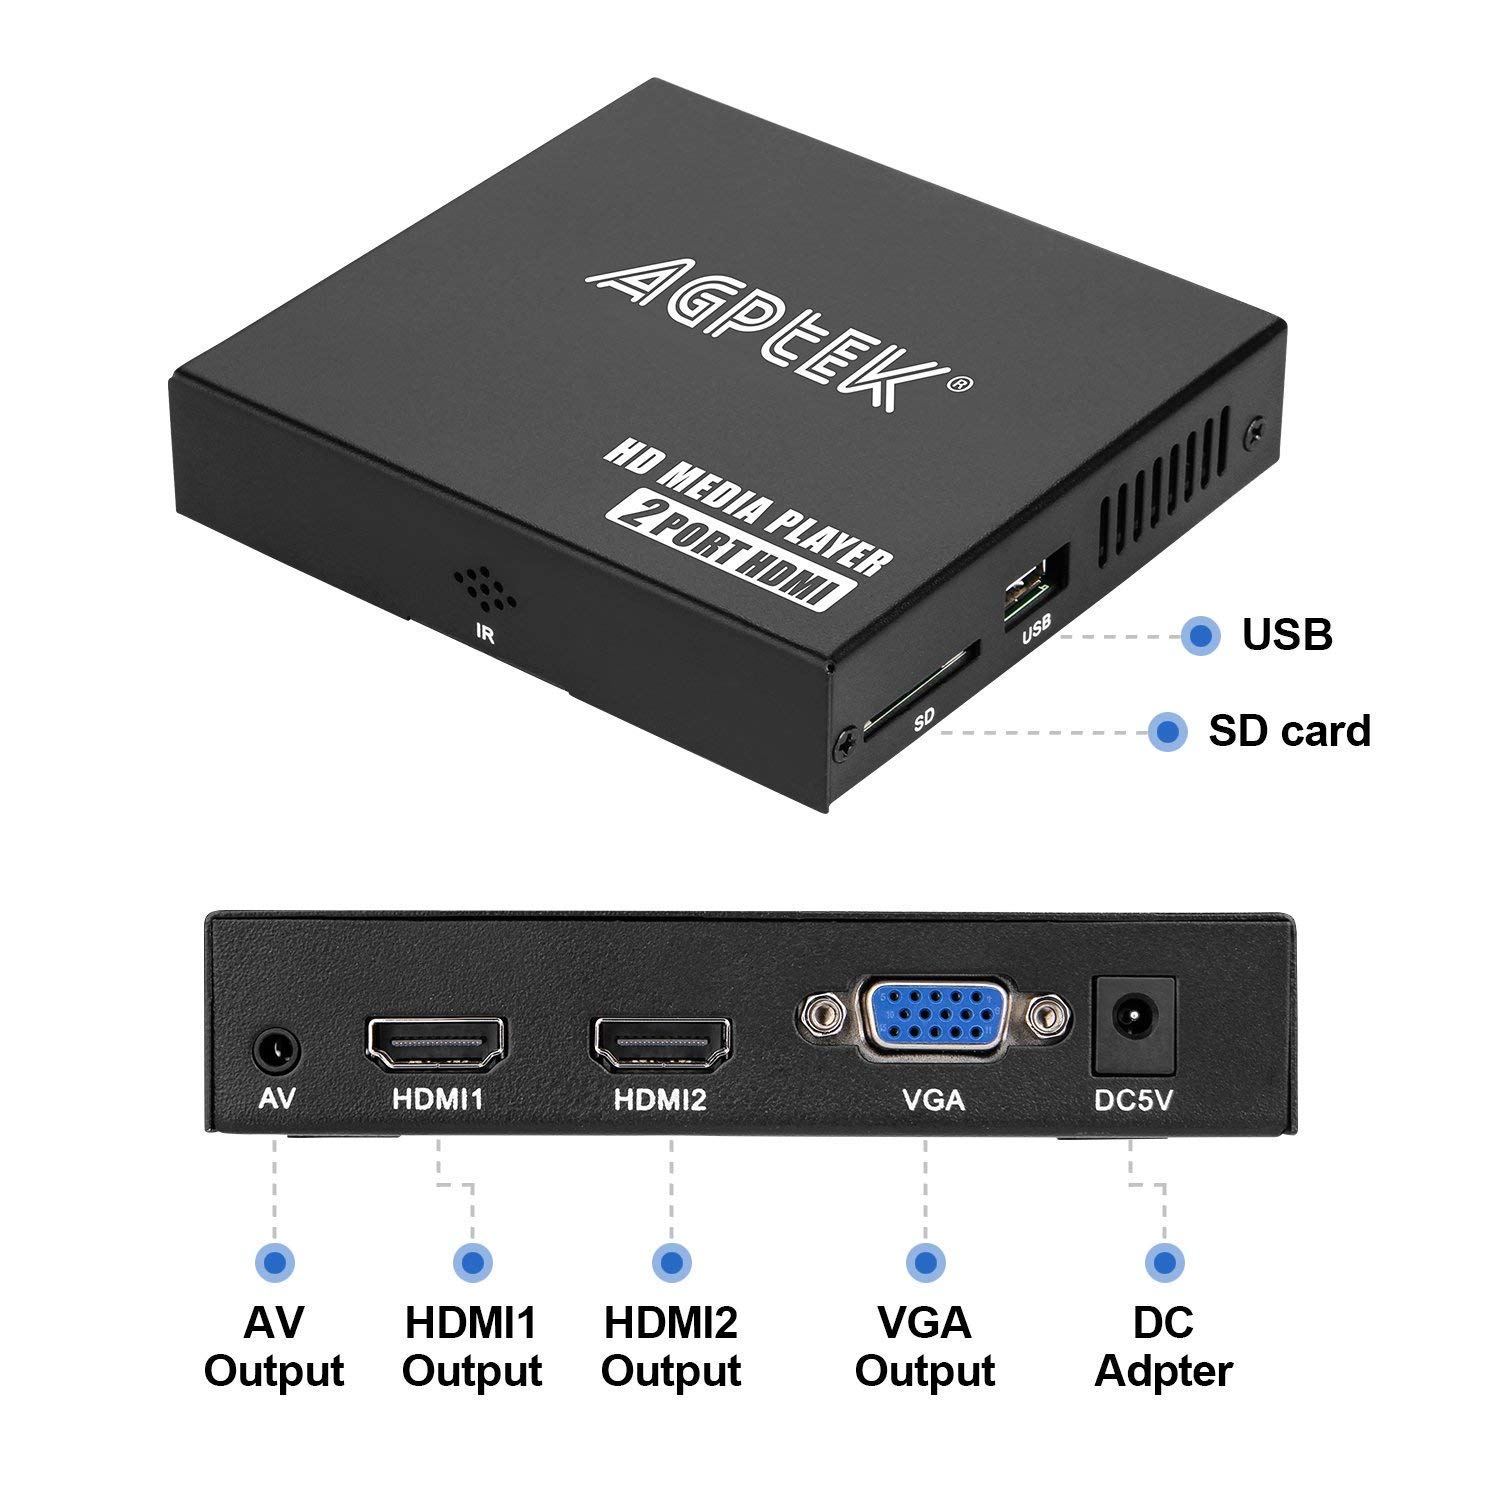 1080P Media Player with ONE AV Cable, Dual HDMI Outpus, Portable MP4 Player for Video/Photo/Music Support USB Drive/SD Card/HDD - HDMI/AV/VGA Output …